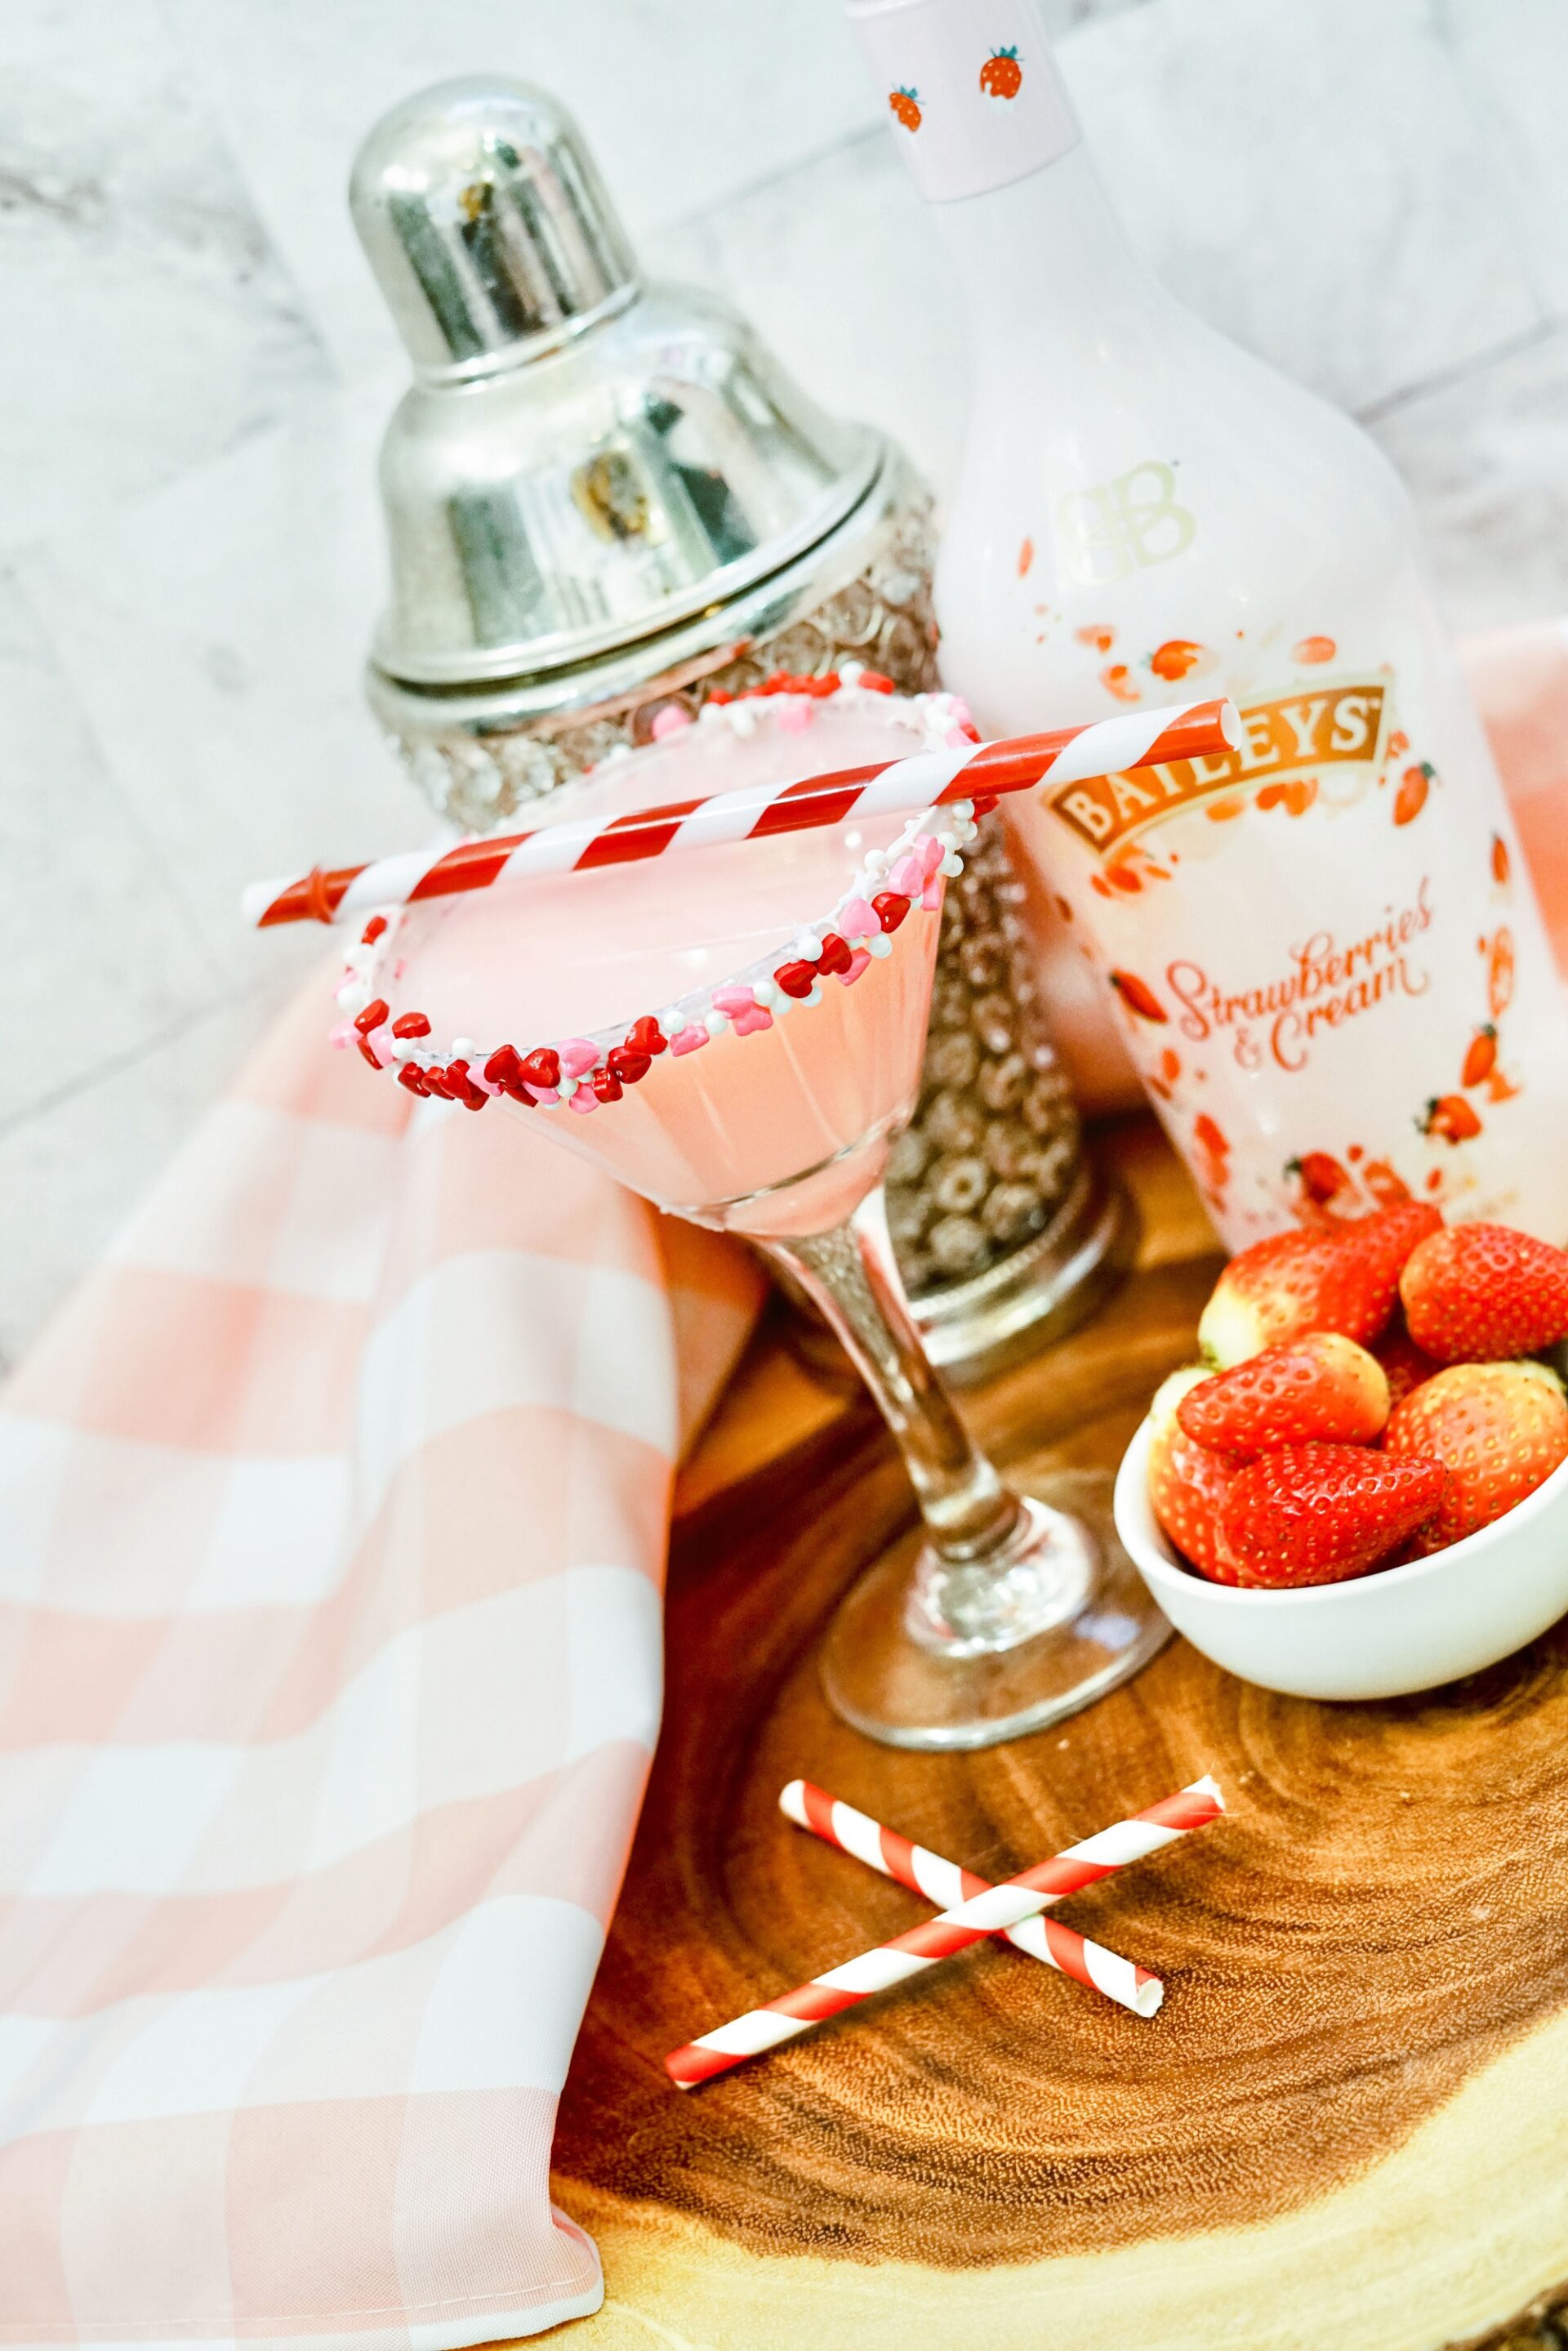 Baileys strawberries and cream martini on a counter.